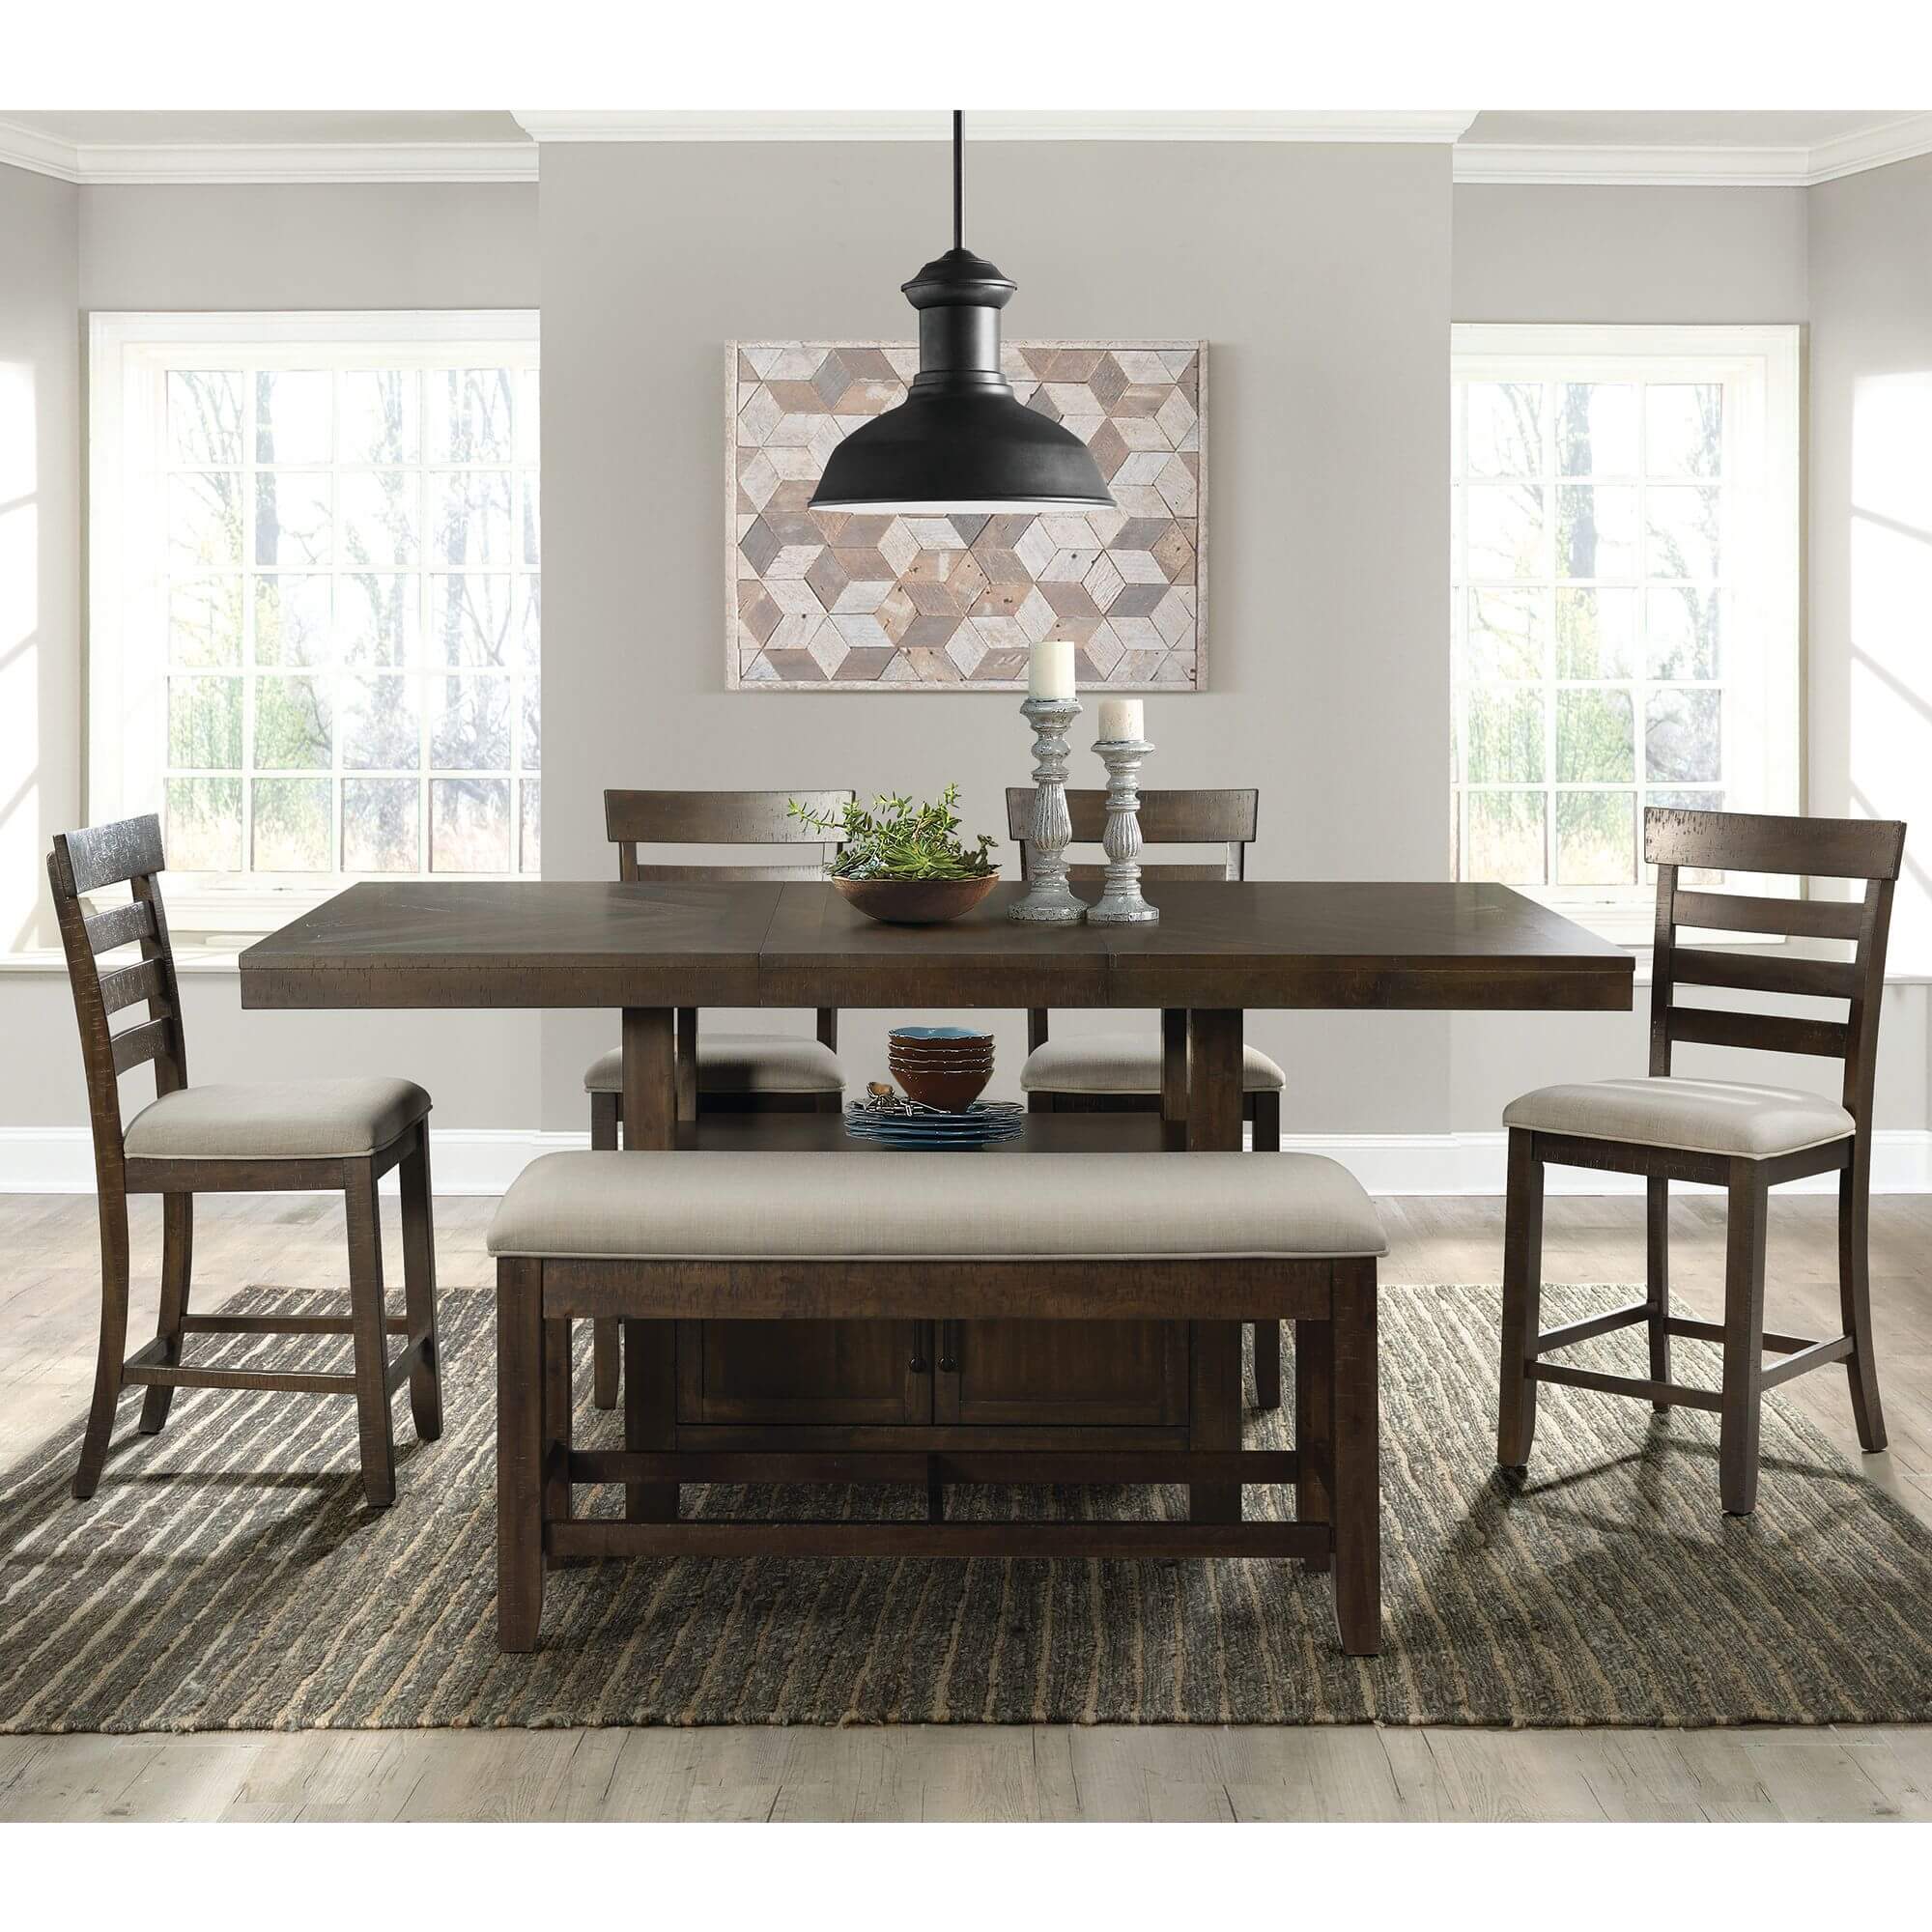 Rent To Own Elements International 6 Piece Colorado Counter Height Dining Room Collection At Aarons Today